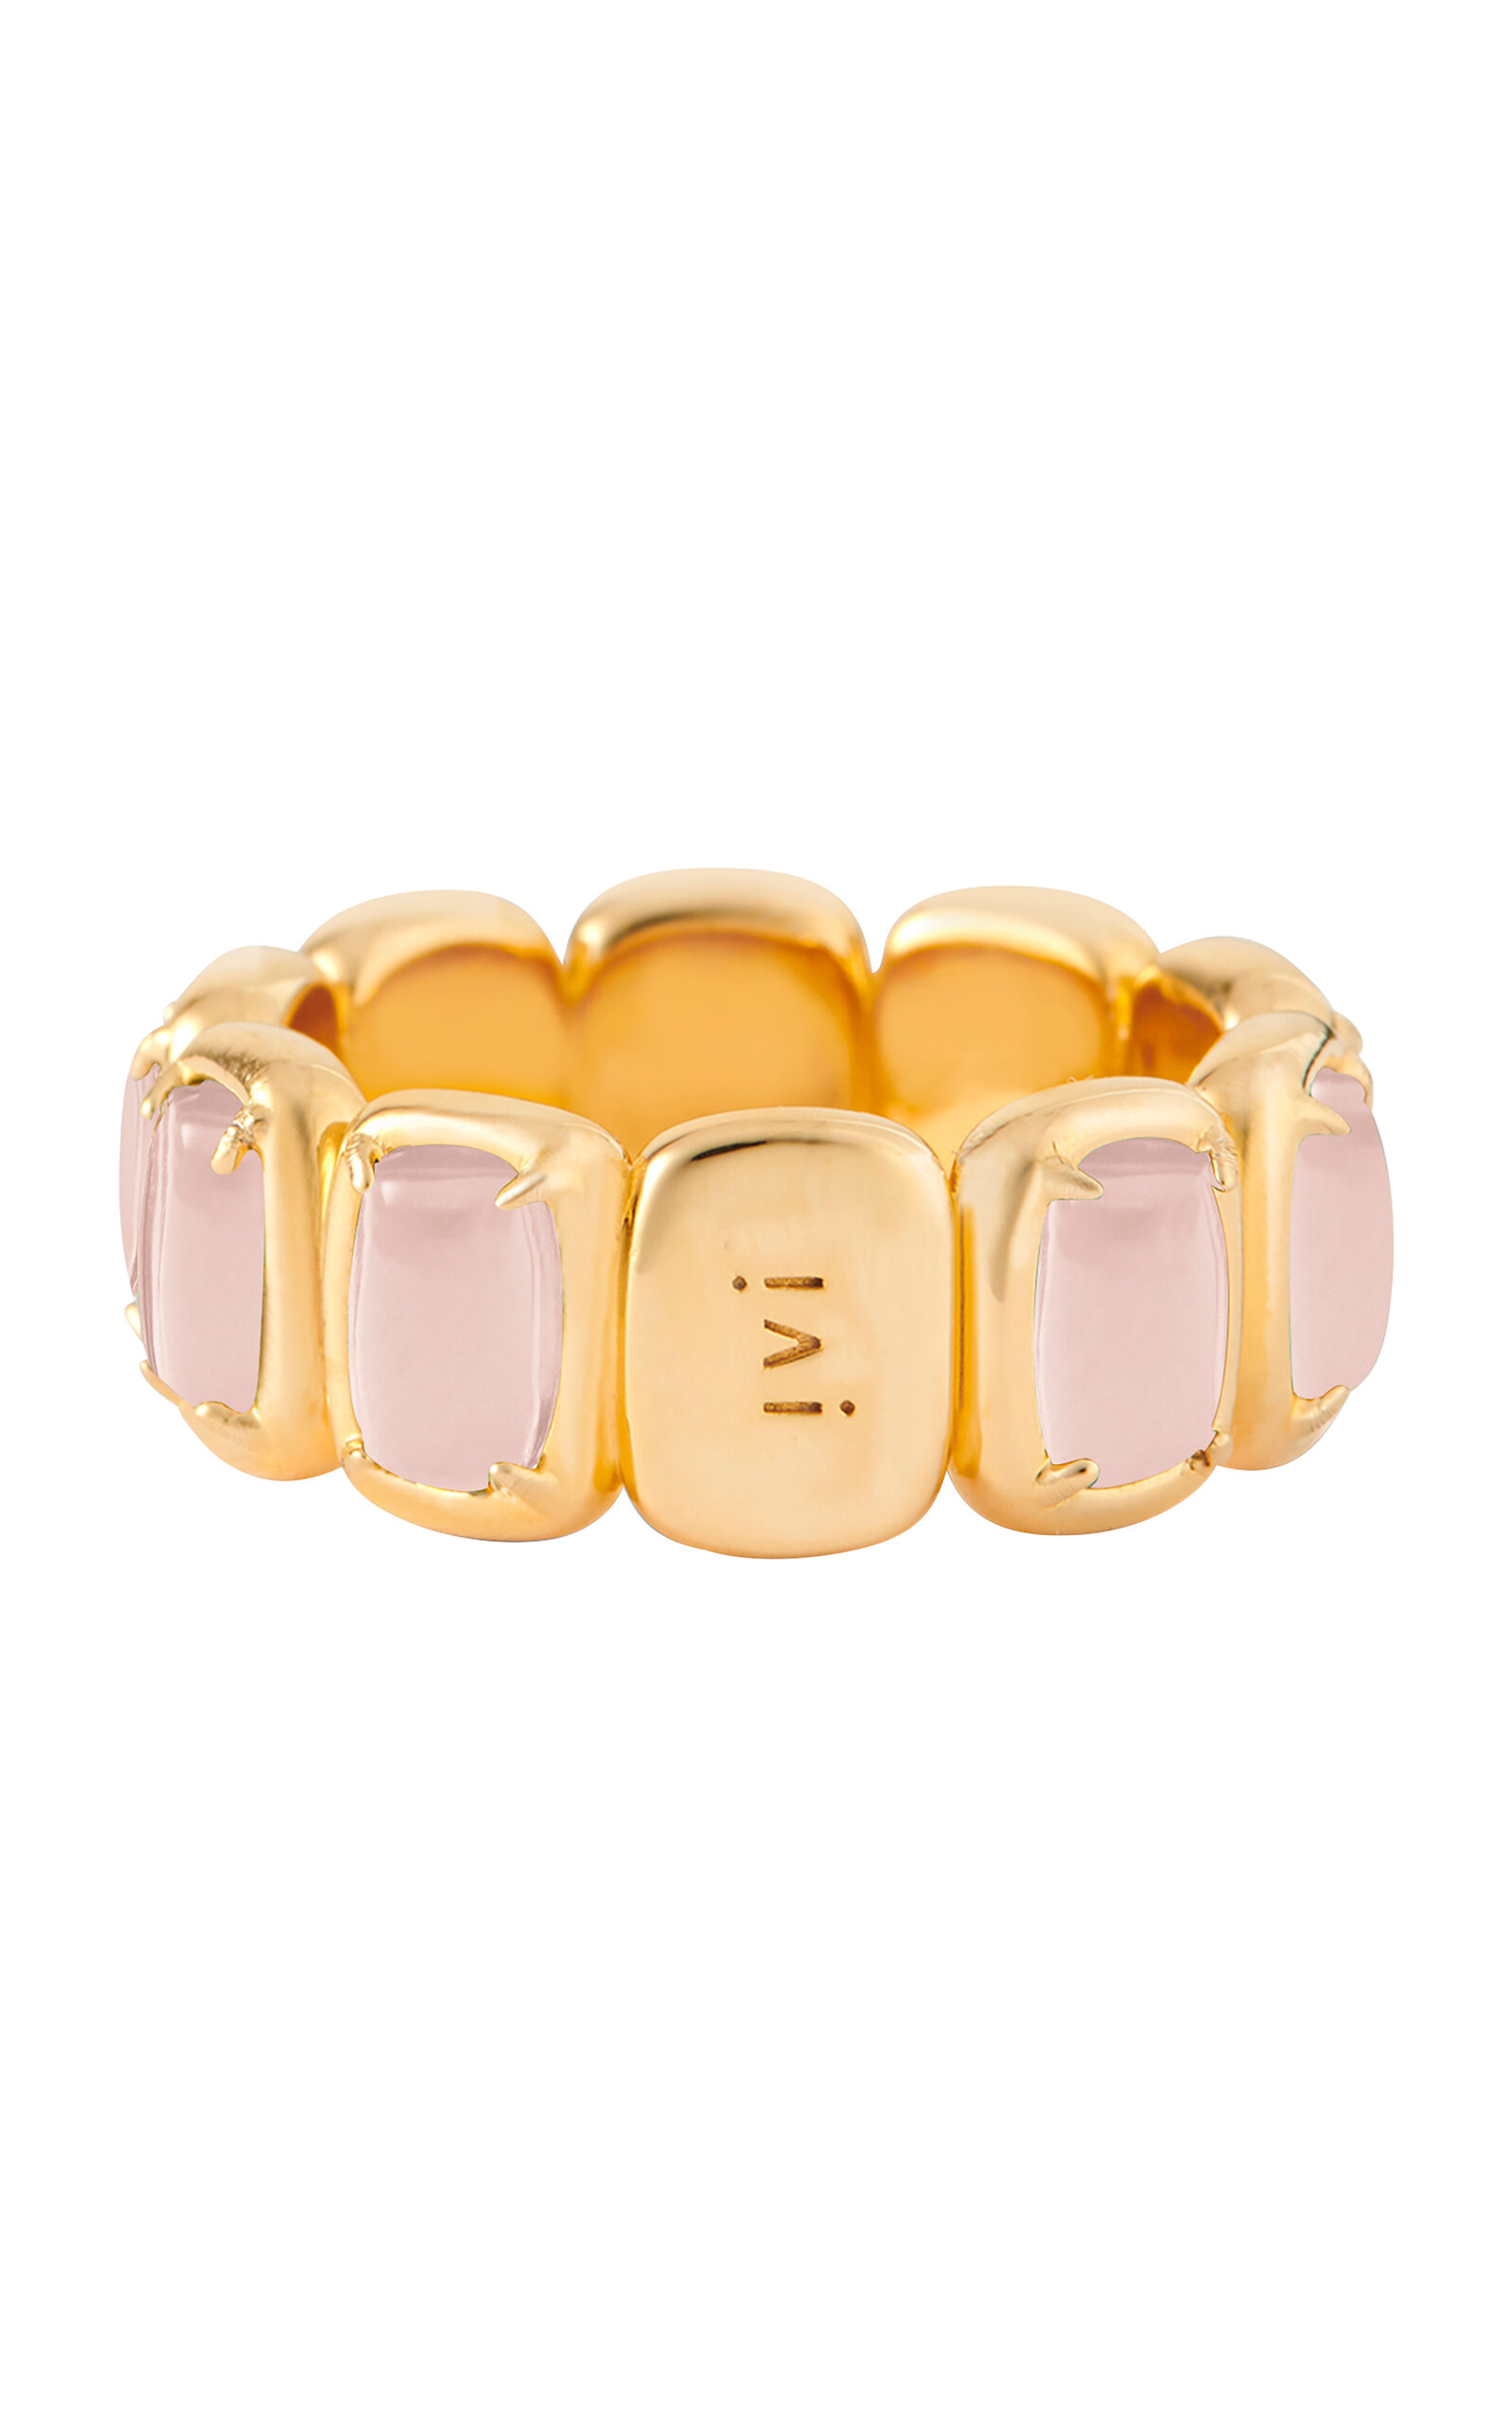 IVI Women's Toy 18k Gold-Plated Pink Opal Ring